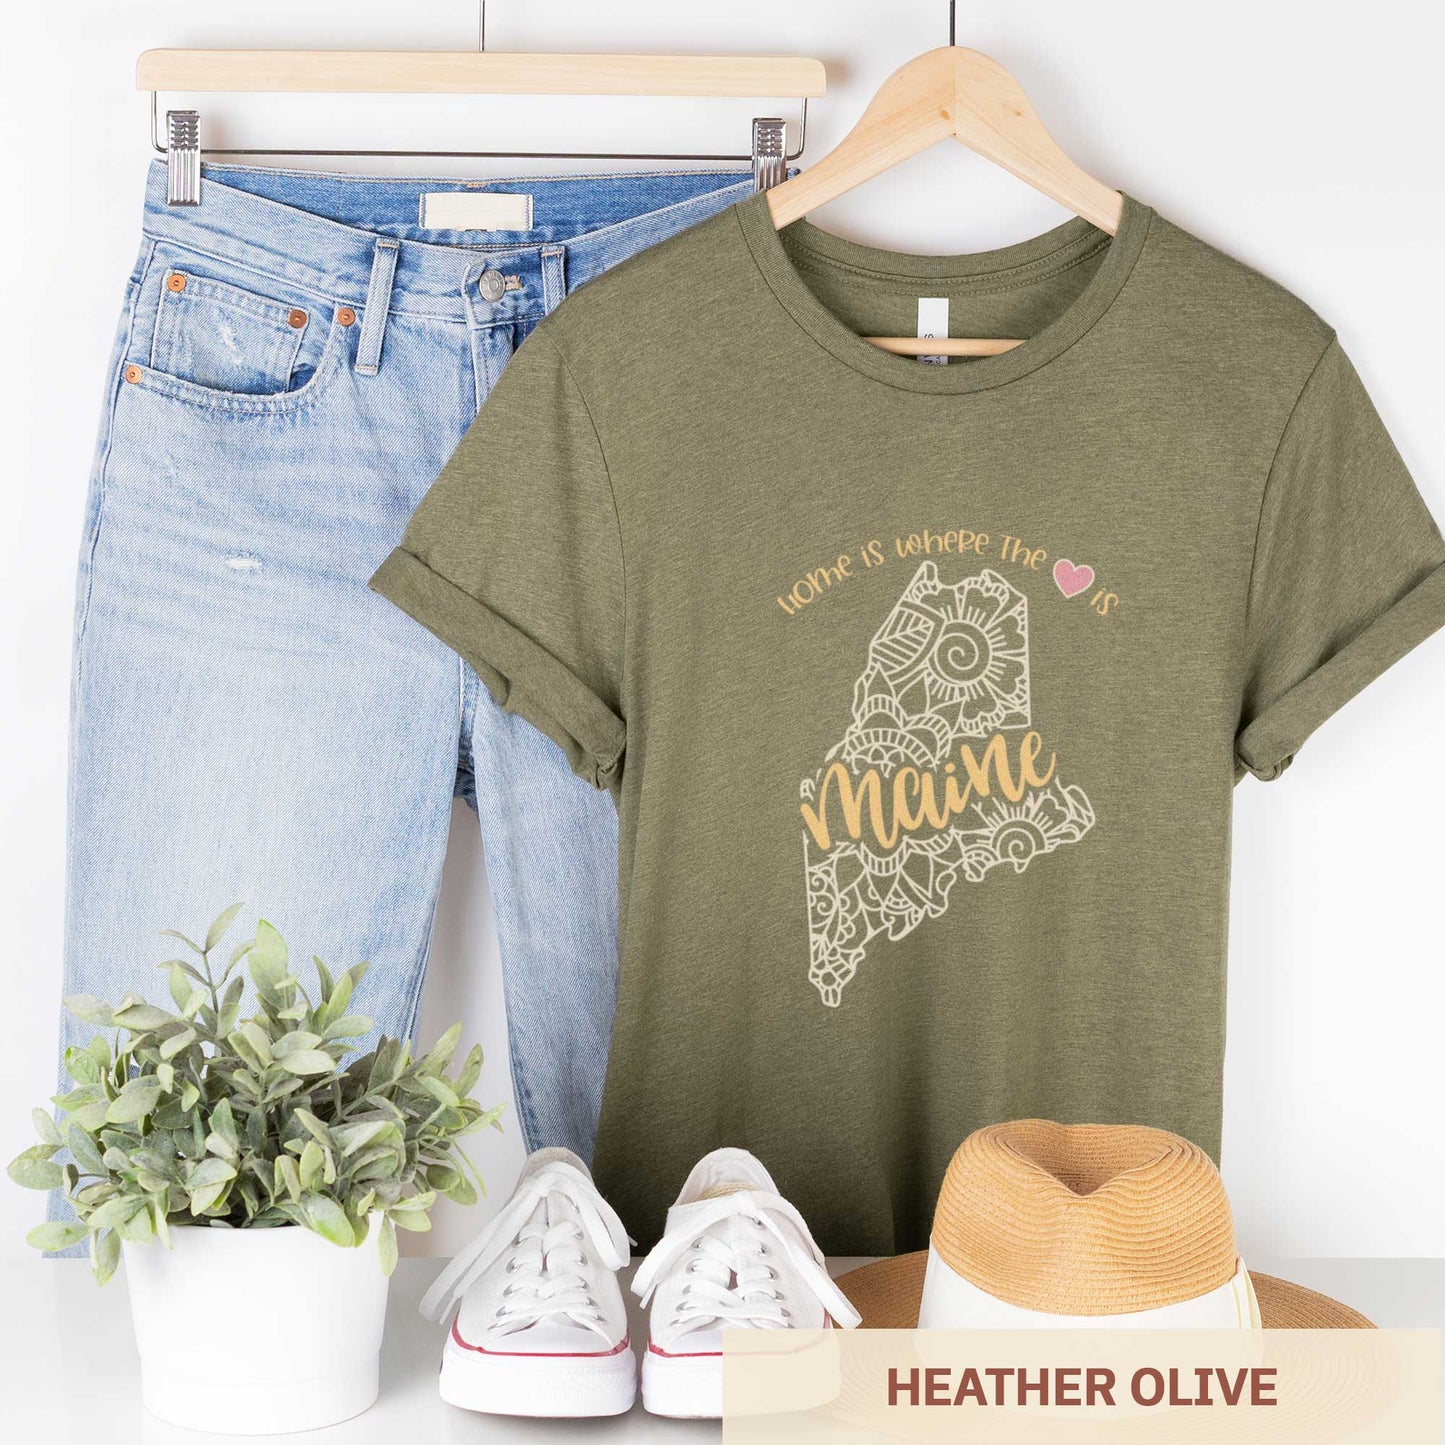 A hanging heather olive Bella Canvas t-shirt featuring a mandala in the shape of Maine with the words home is where the heart is.